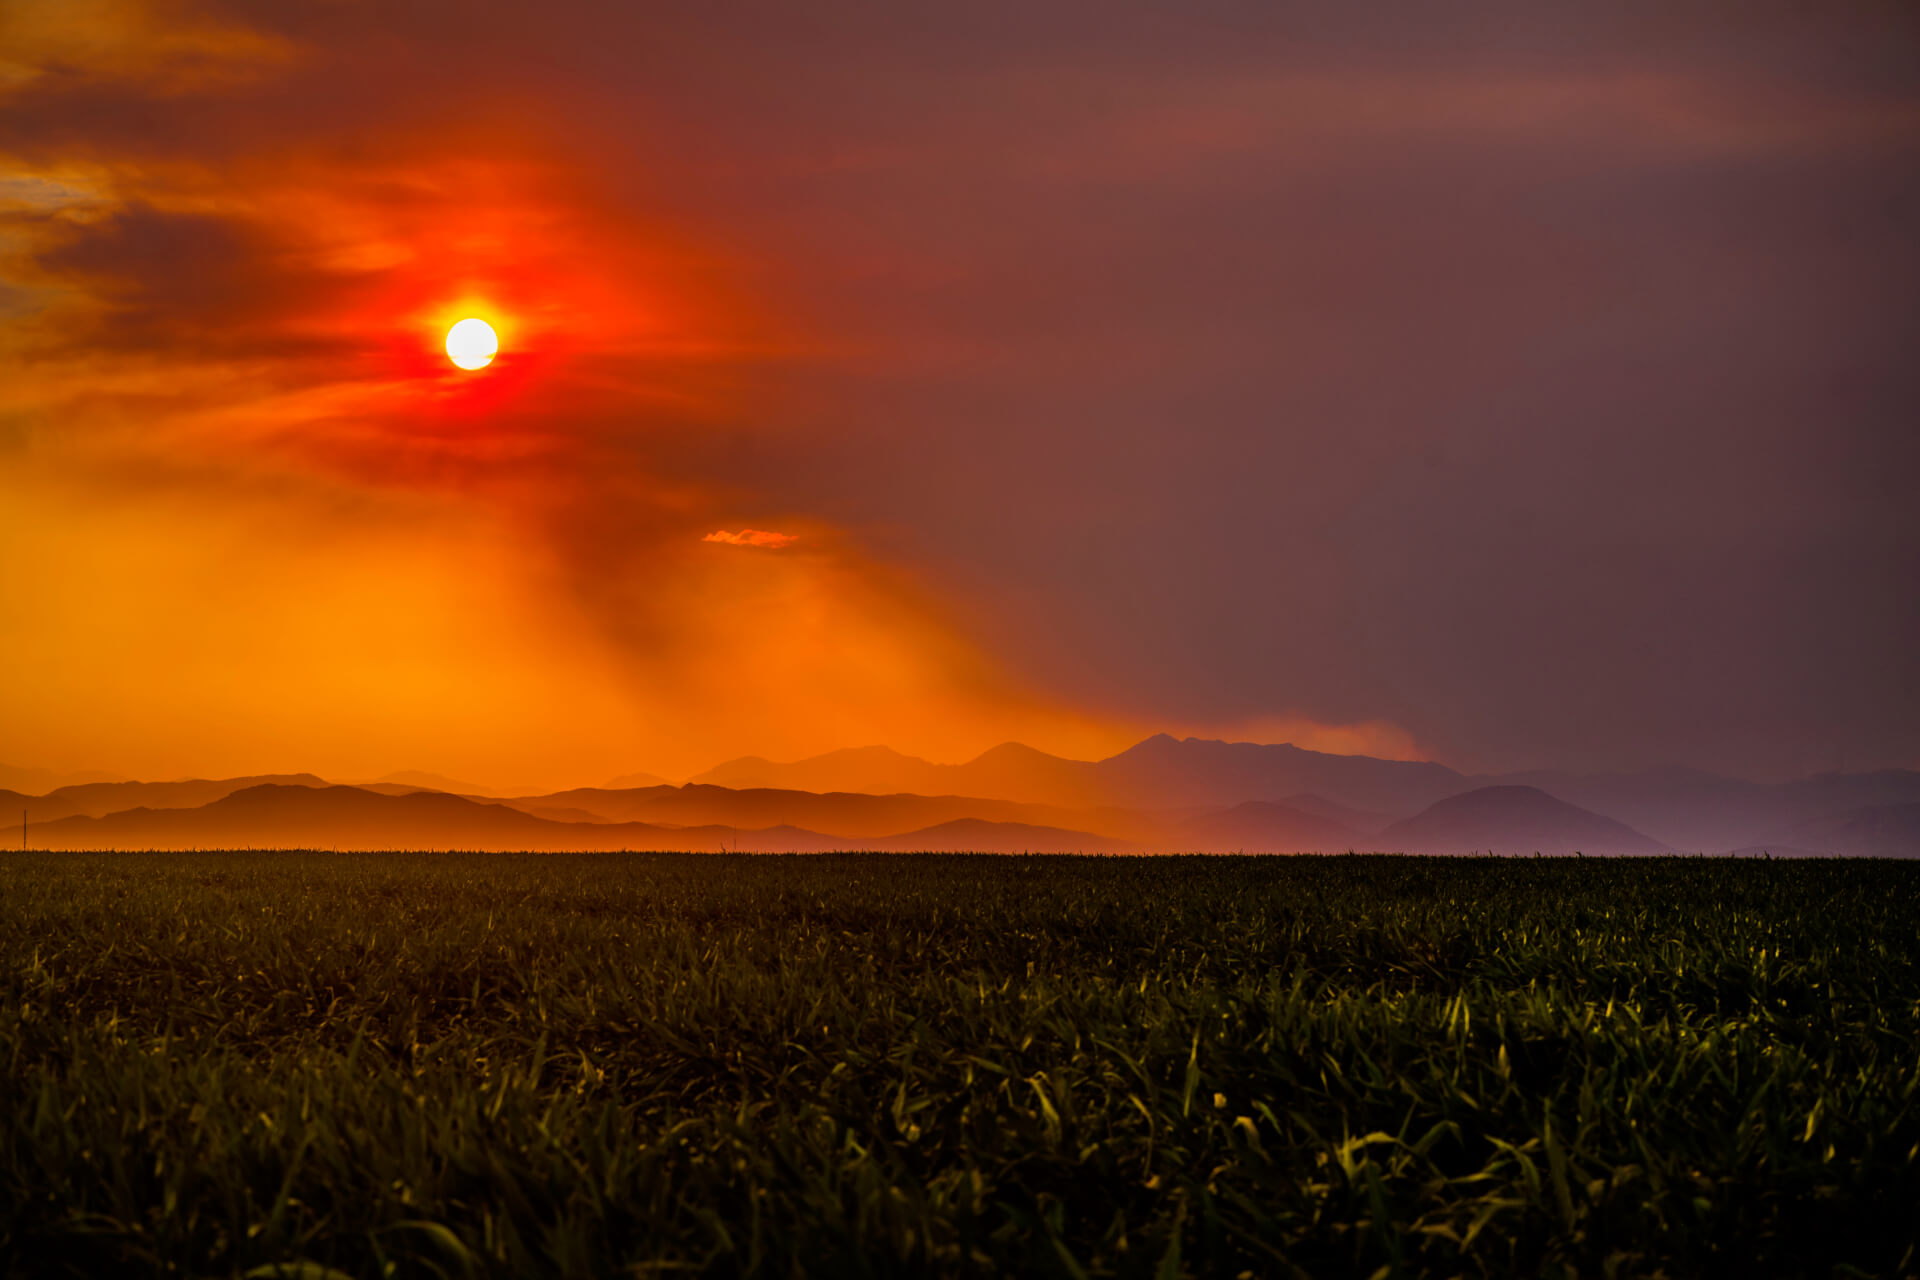 MEDIA: On climate change and Colorado wildfire coverage - The Colorado Independent